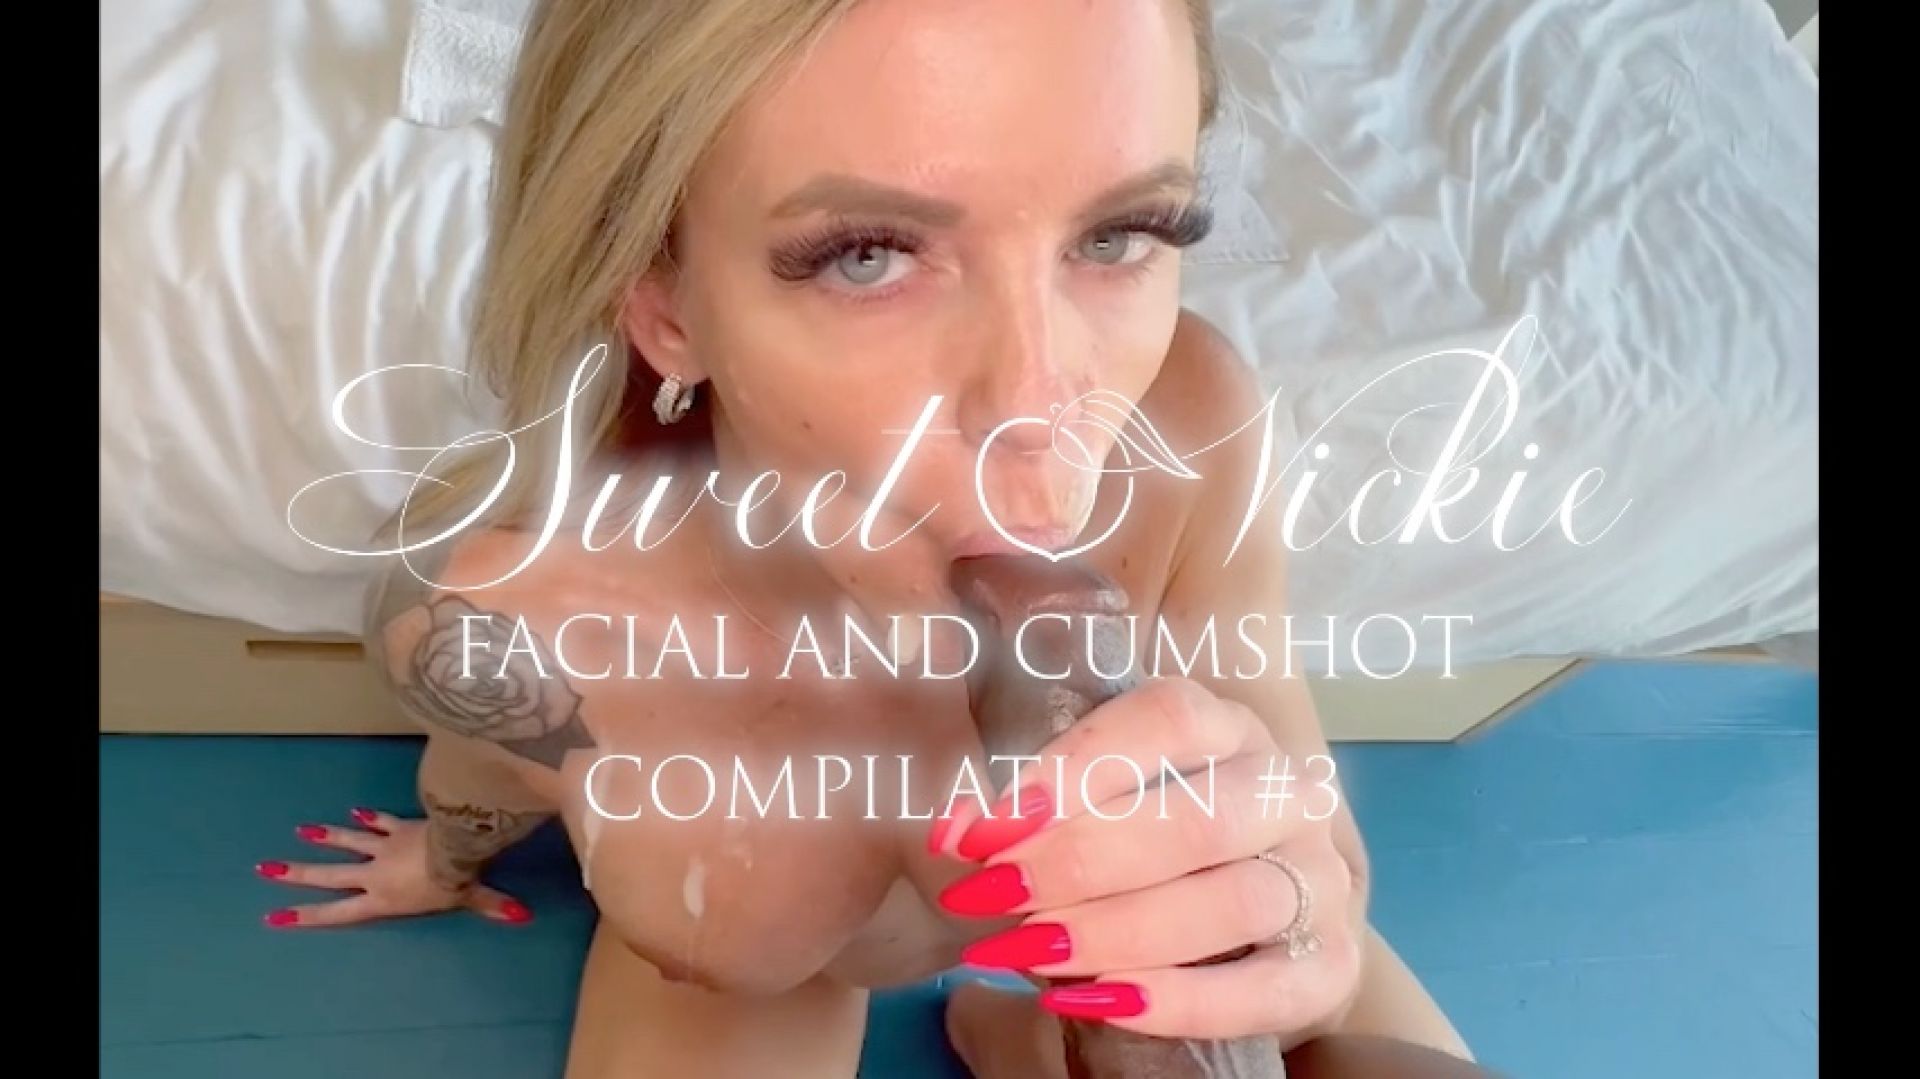 leaked HUGE FACIAL AND CUMPILATION #3 video thumbnail